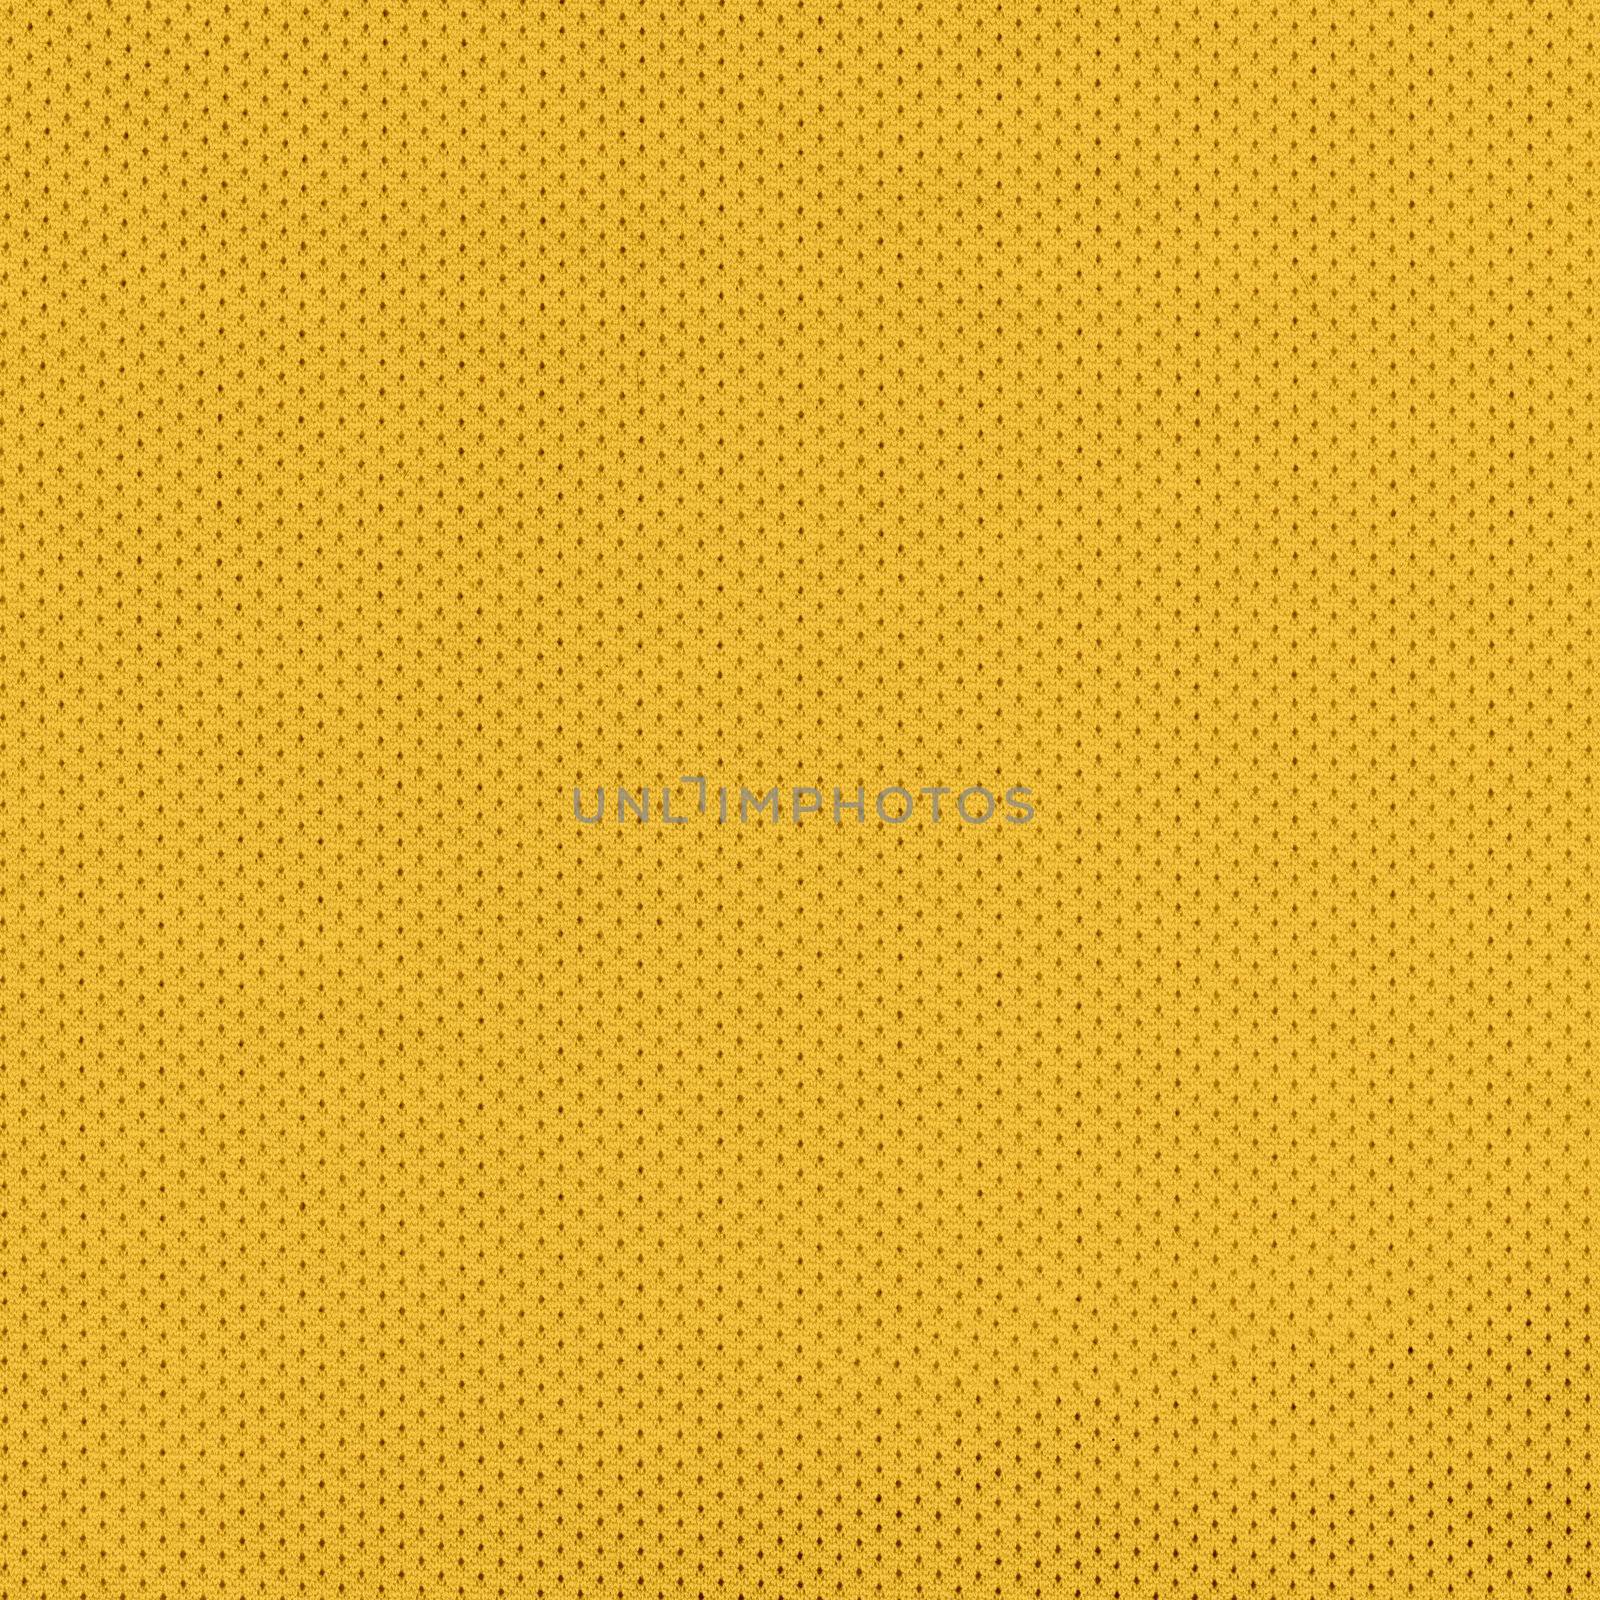 Yellow Jersey Mesh by grivet